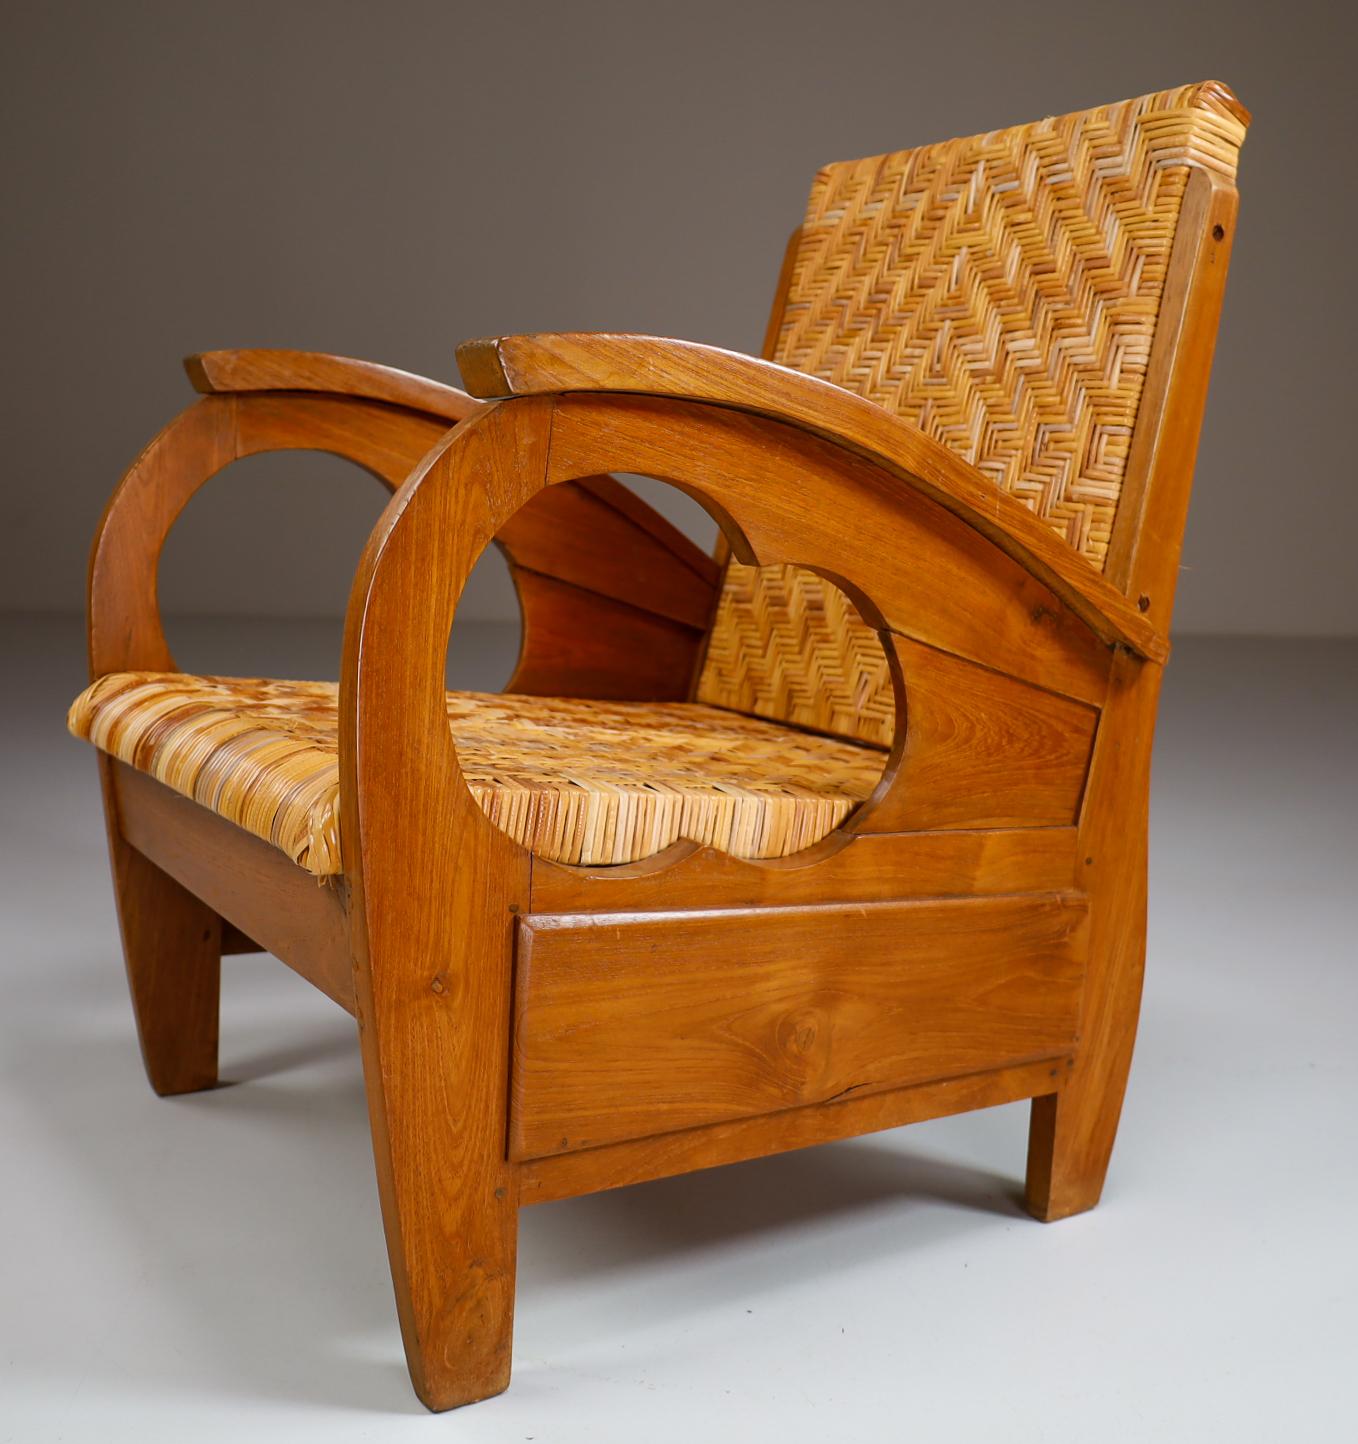 A unique British Colonial Art Deco lounge chairs in hardwood with cane seat. This Art Deco British Colonial armchair would work great in an Art Deco, Mid-Century Modern, Scandinavian Modern or Danish Modern home or penthouse apartment but could also